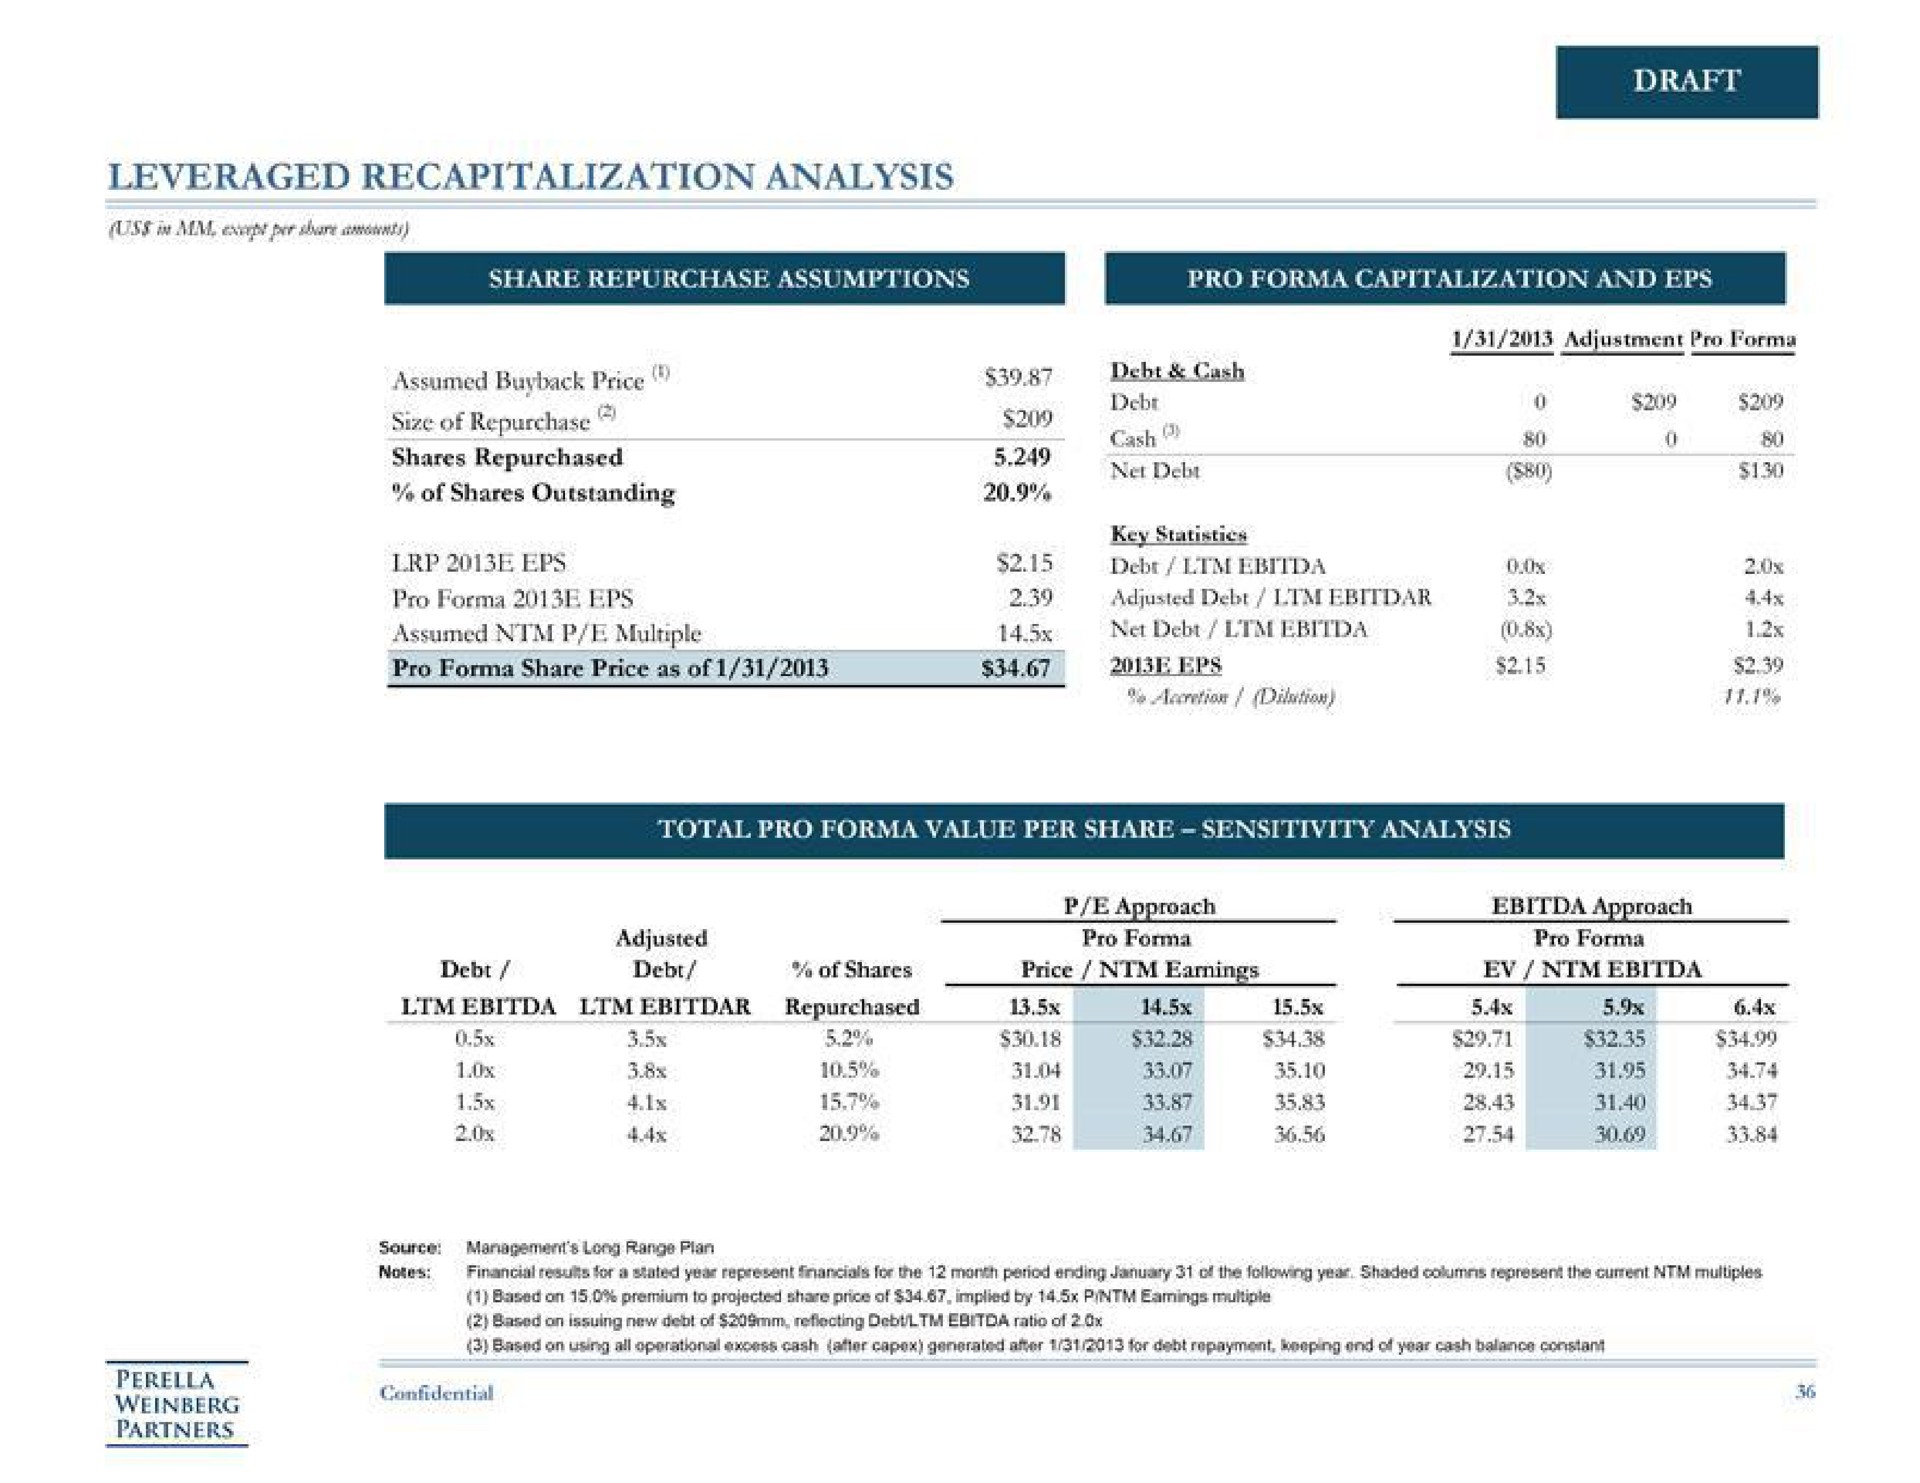 leveraged recapitalization analysis draft shares repurchased pro share price as of net | Perella Weinberg Partners